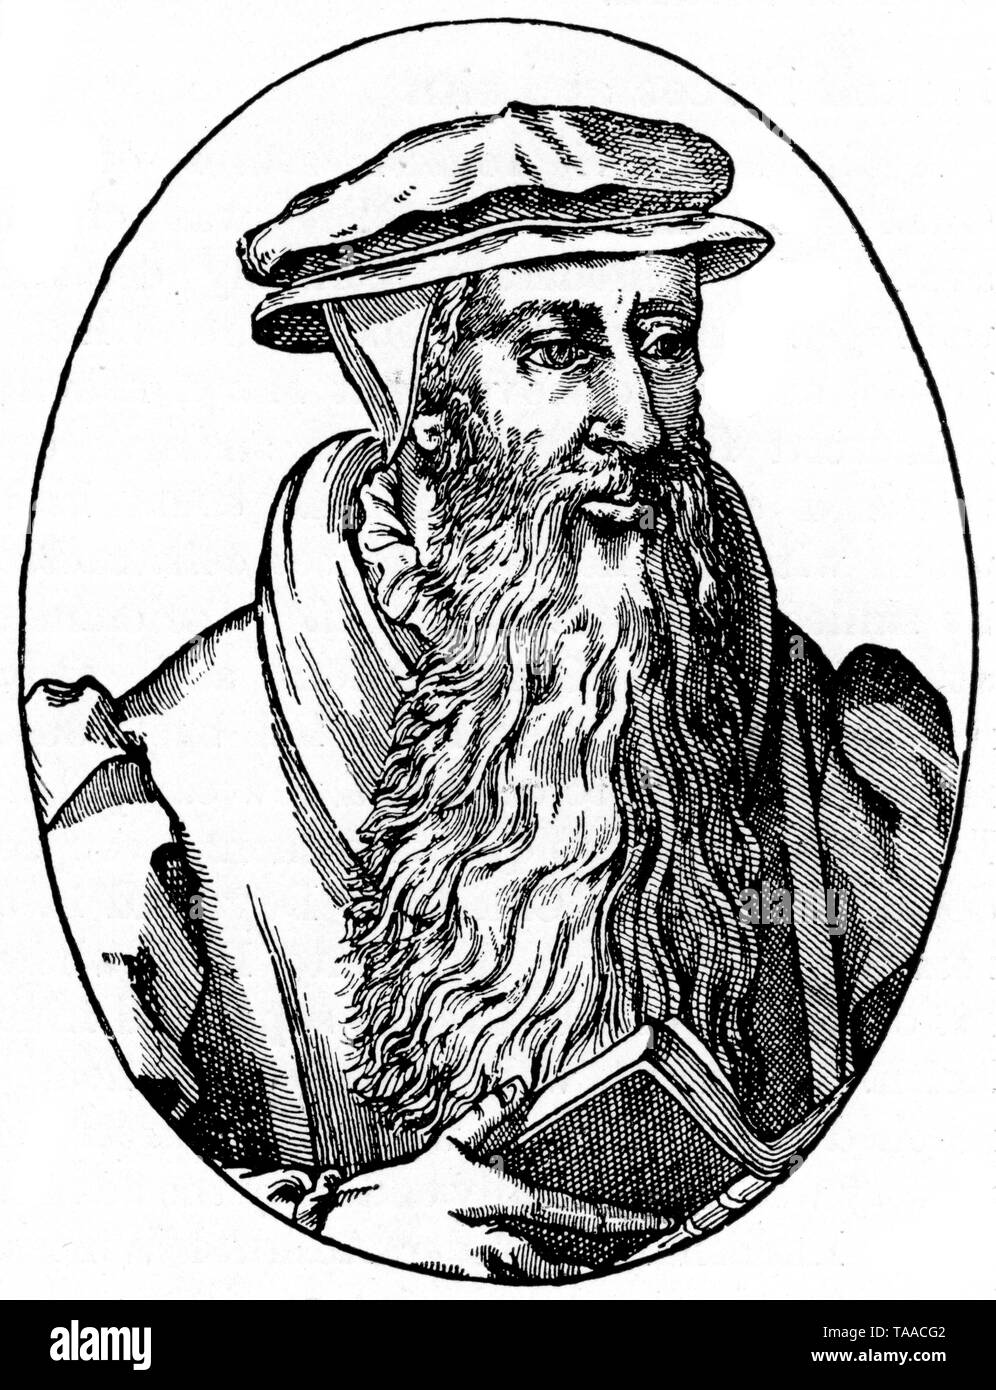 John Knox (c1514-1572). By Theodore Beza (1519-1605). From a woodcut in Theodore Beza's 'Icons', 1580. Scottish clergyman John Knox was a leader of the Protestant Reformation and is considered the founder of the Presbyterian denomination in Scotland. Stock Photo